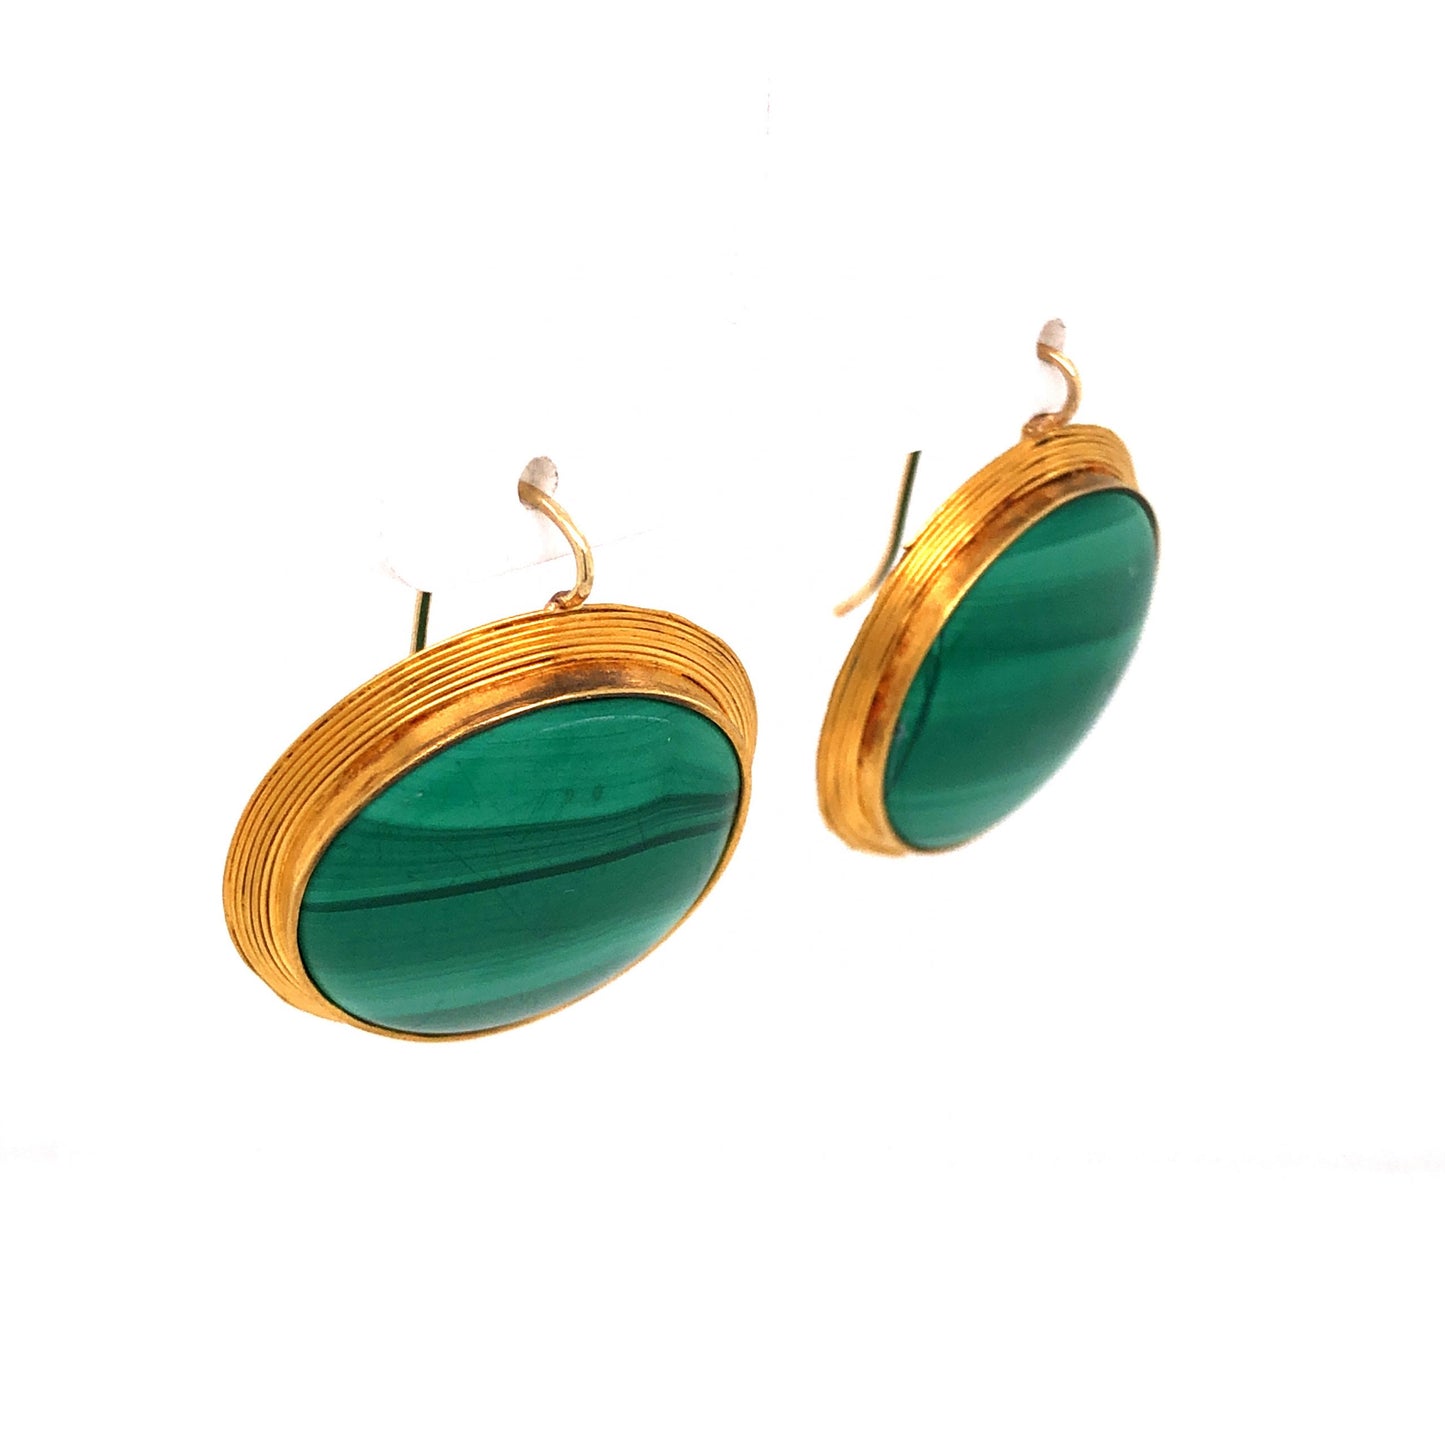 Large Cabochon Malachite Earrings in 14k Yellow Gold